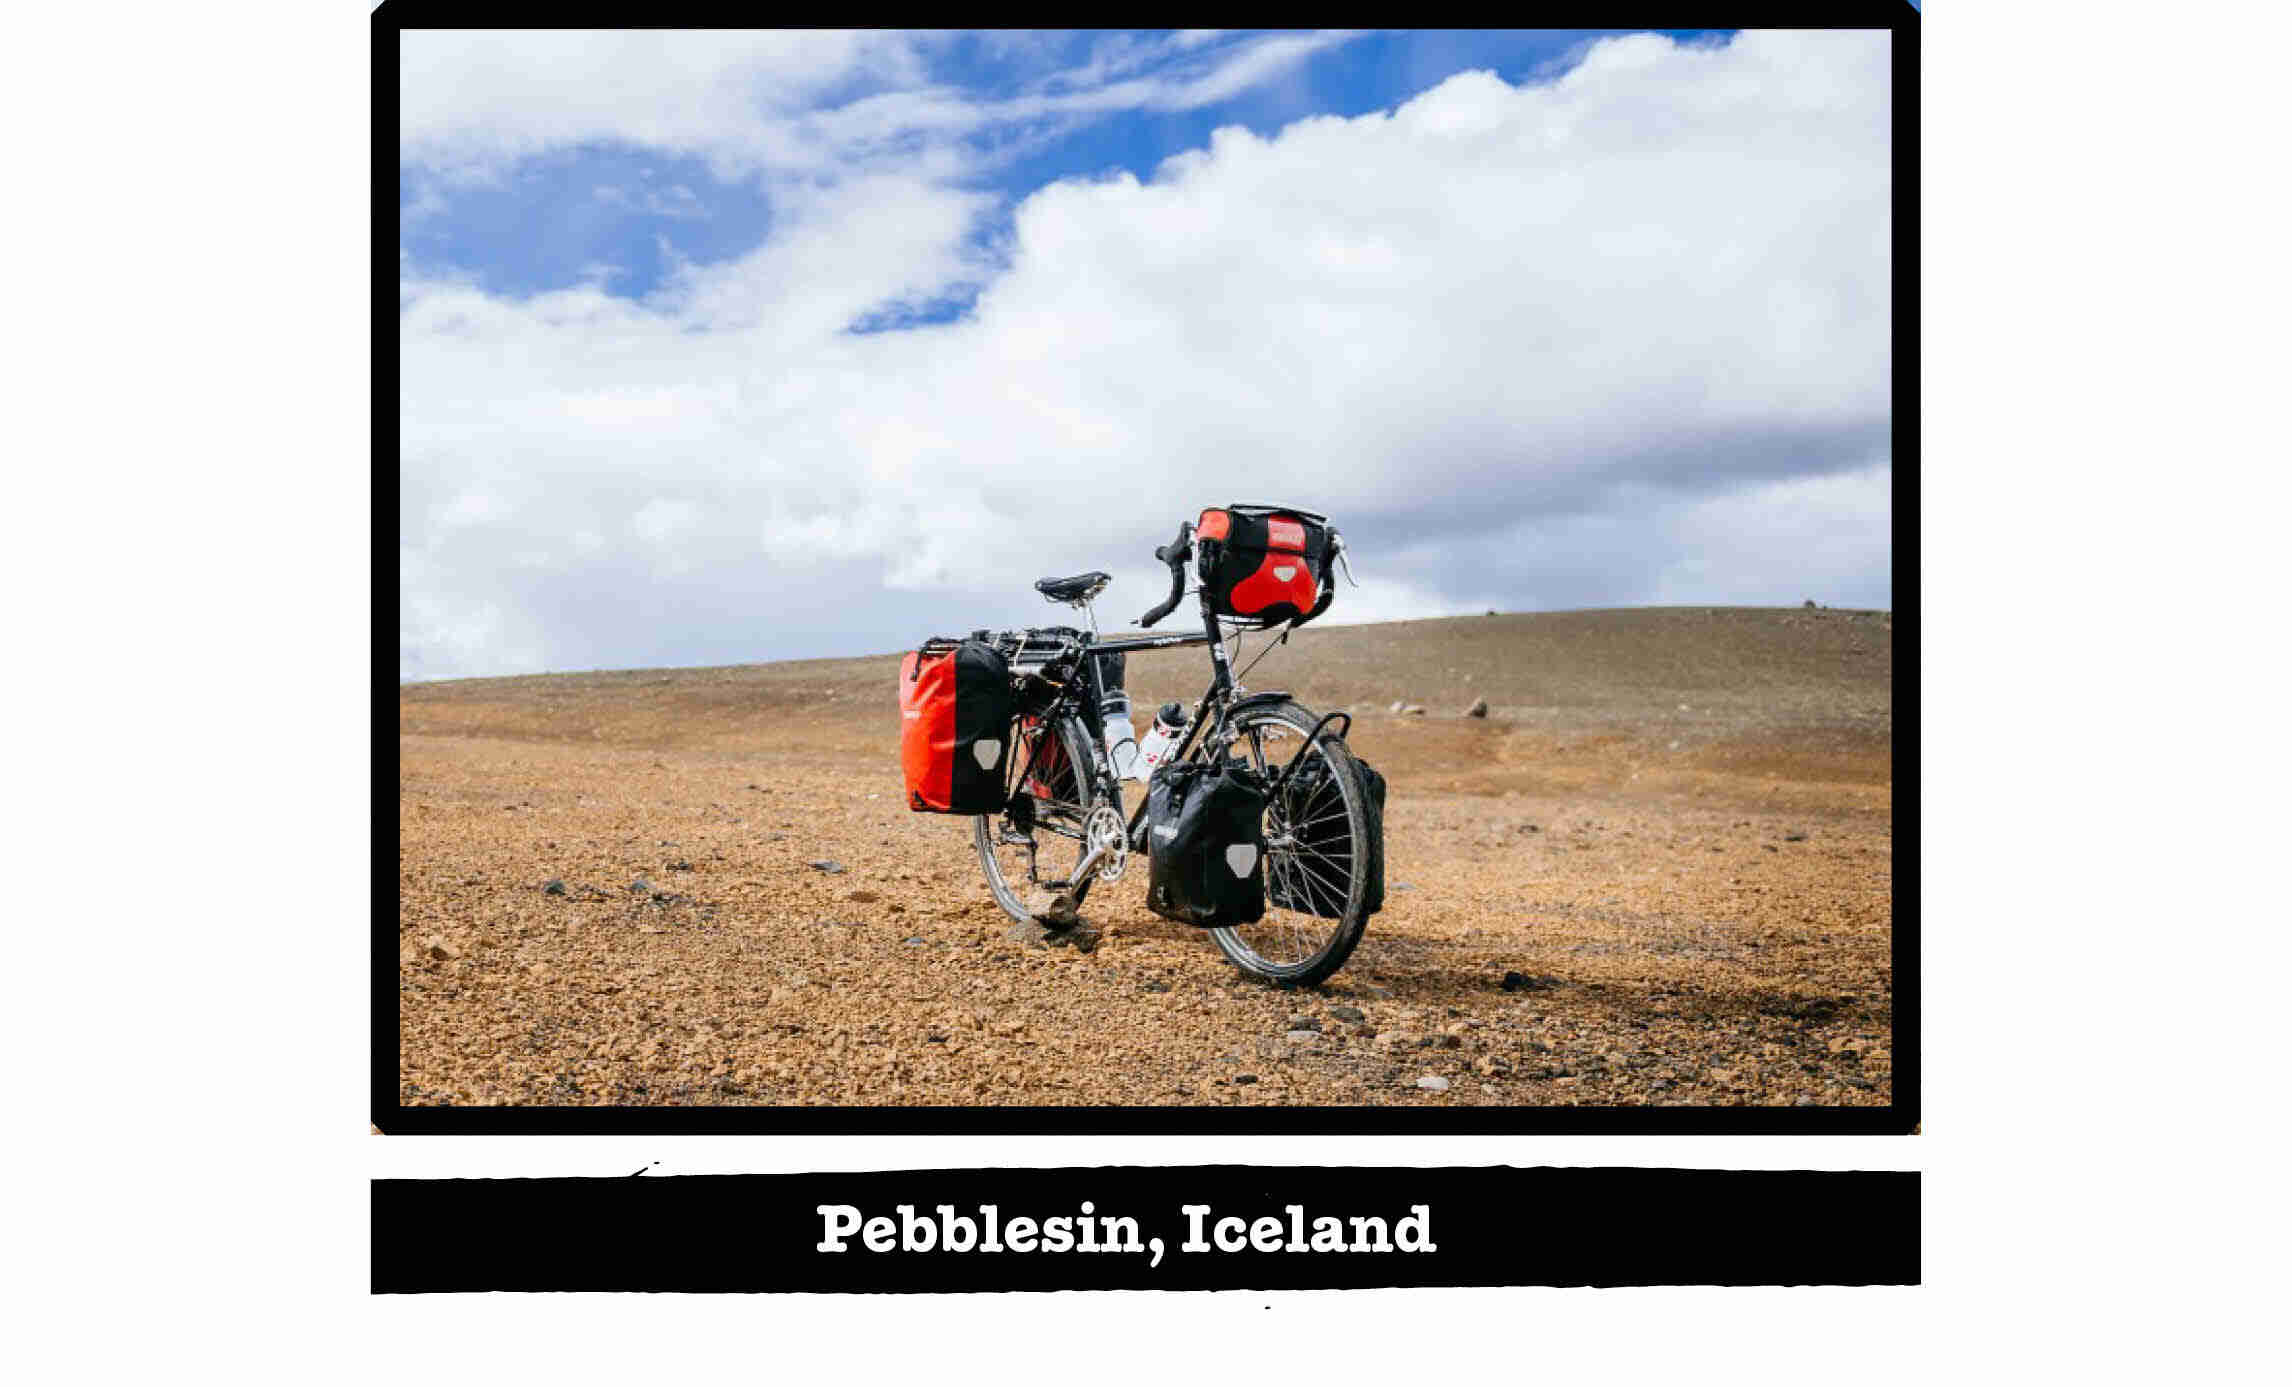 Right front of view of a Surly bike on a gravel field - Pebblesin, Iceland tag below the image